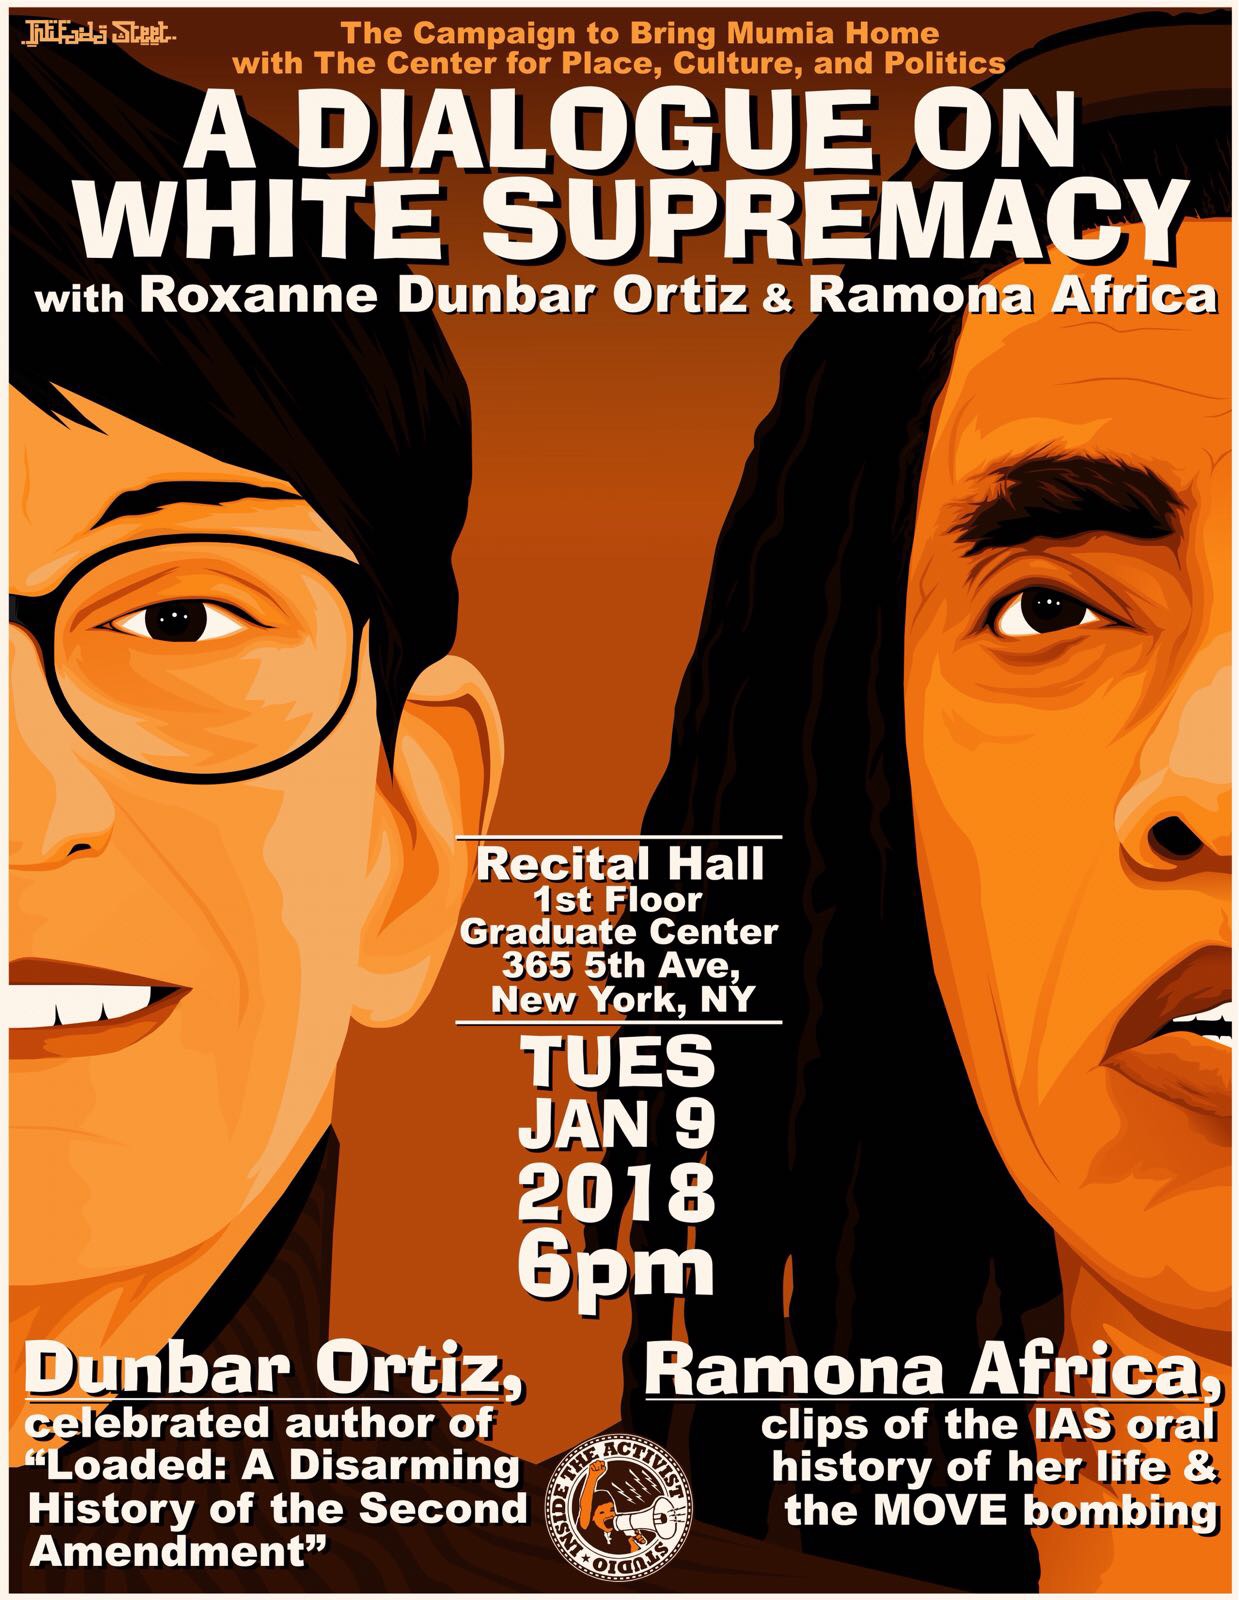 01/09: A Dialogue on White Supremacy with Roxane Dunbar Ortiz and Ramona Africa